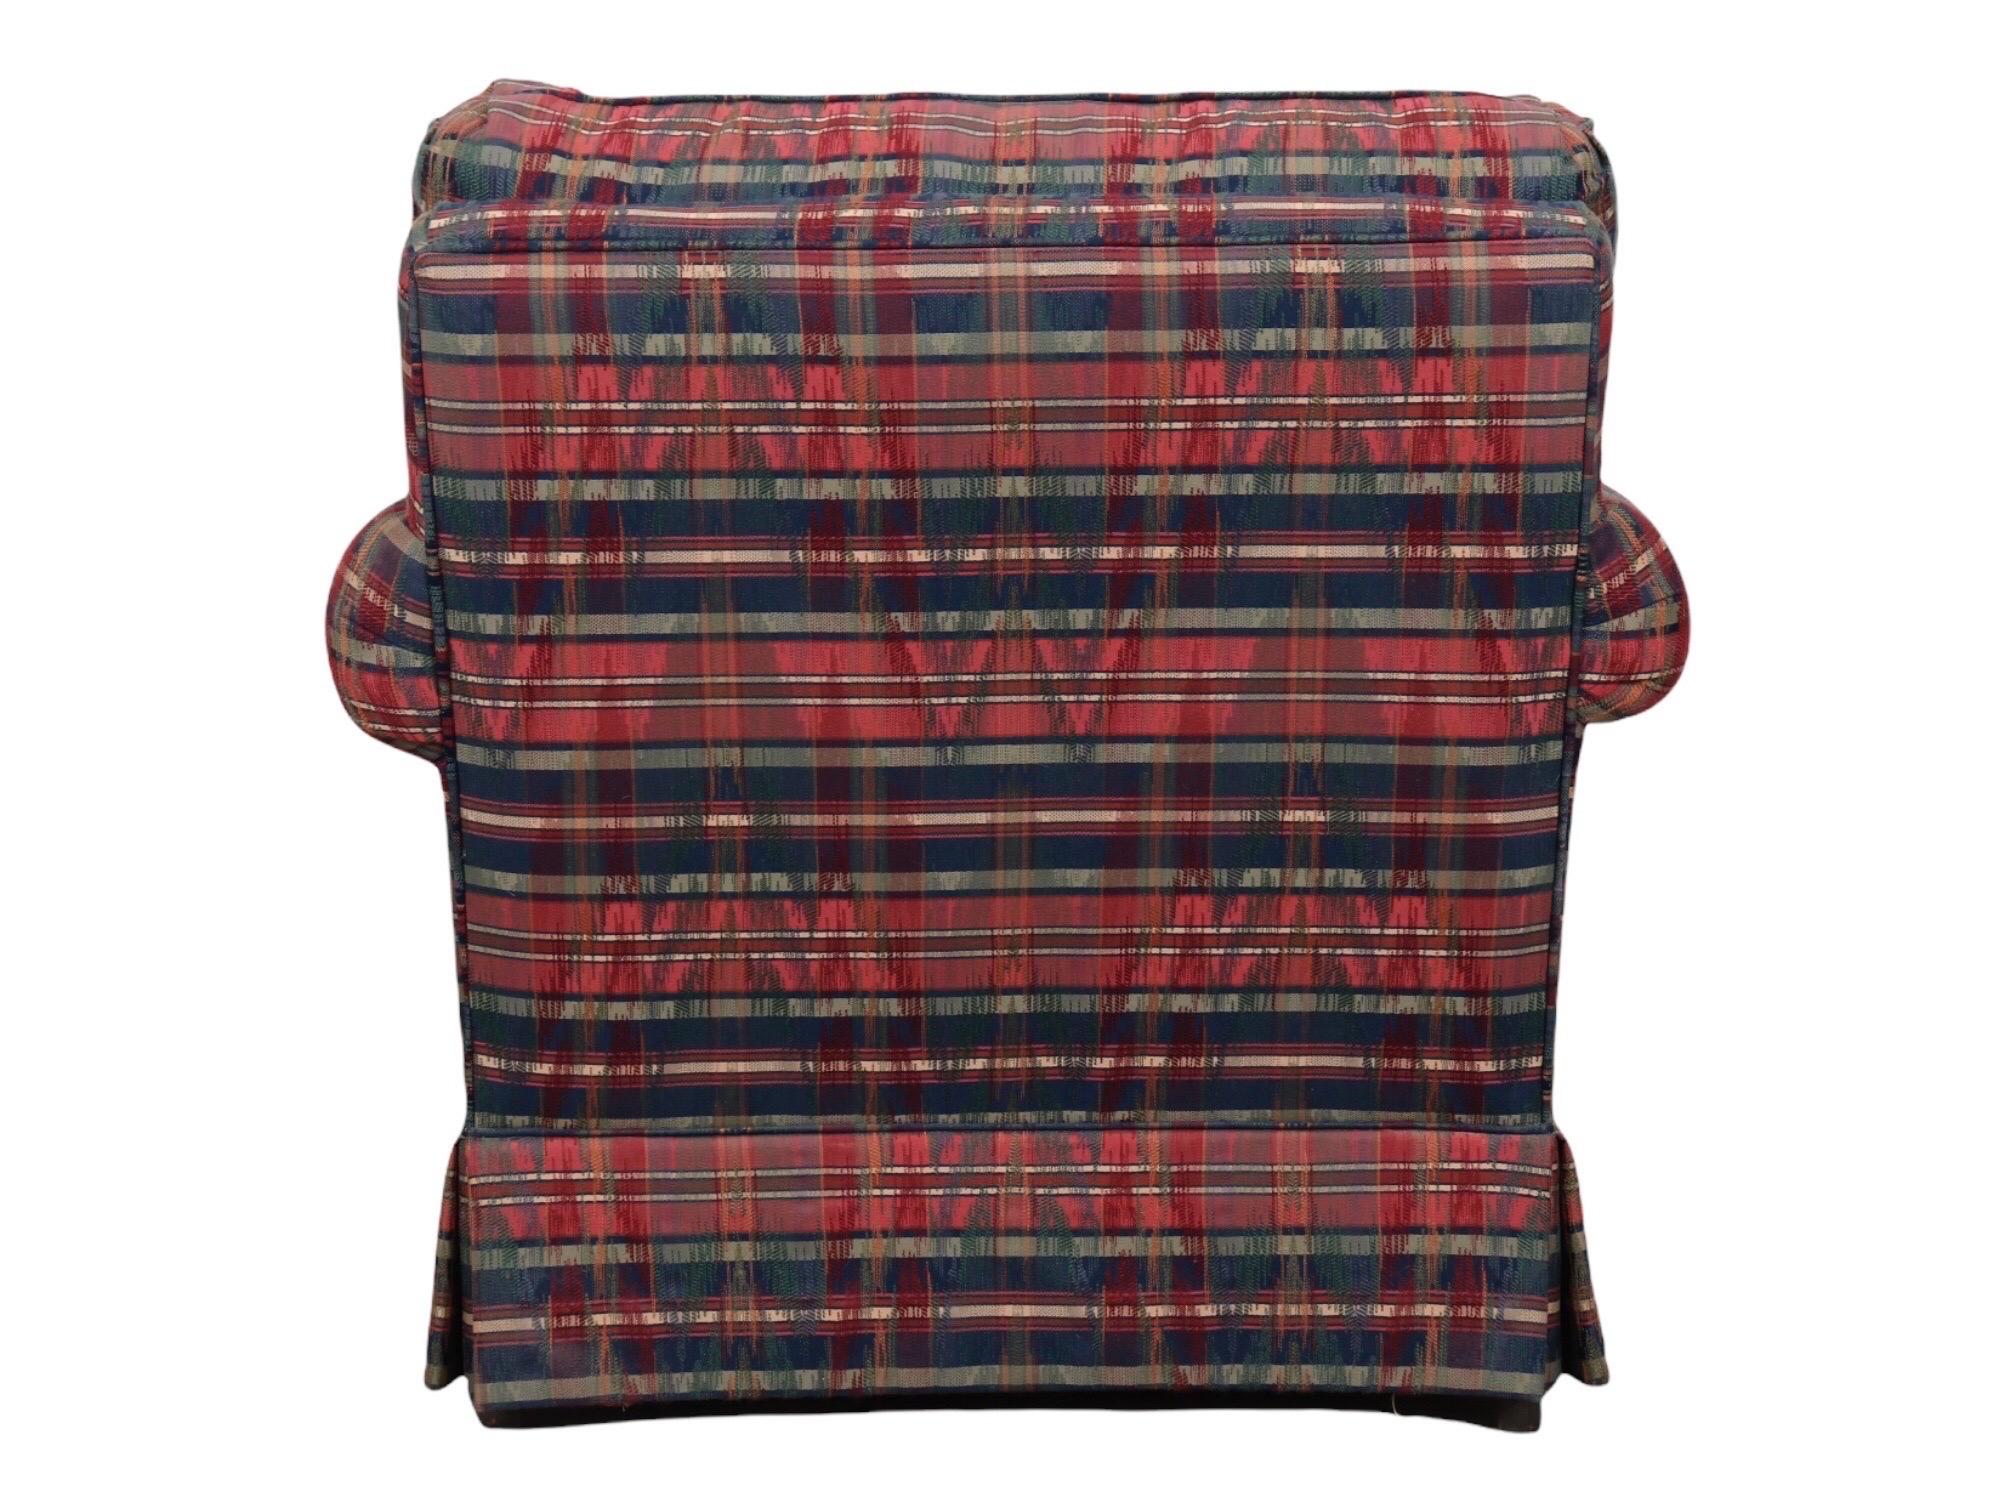 Fabric Wesley Hall Upholstered Armchair